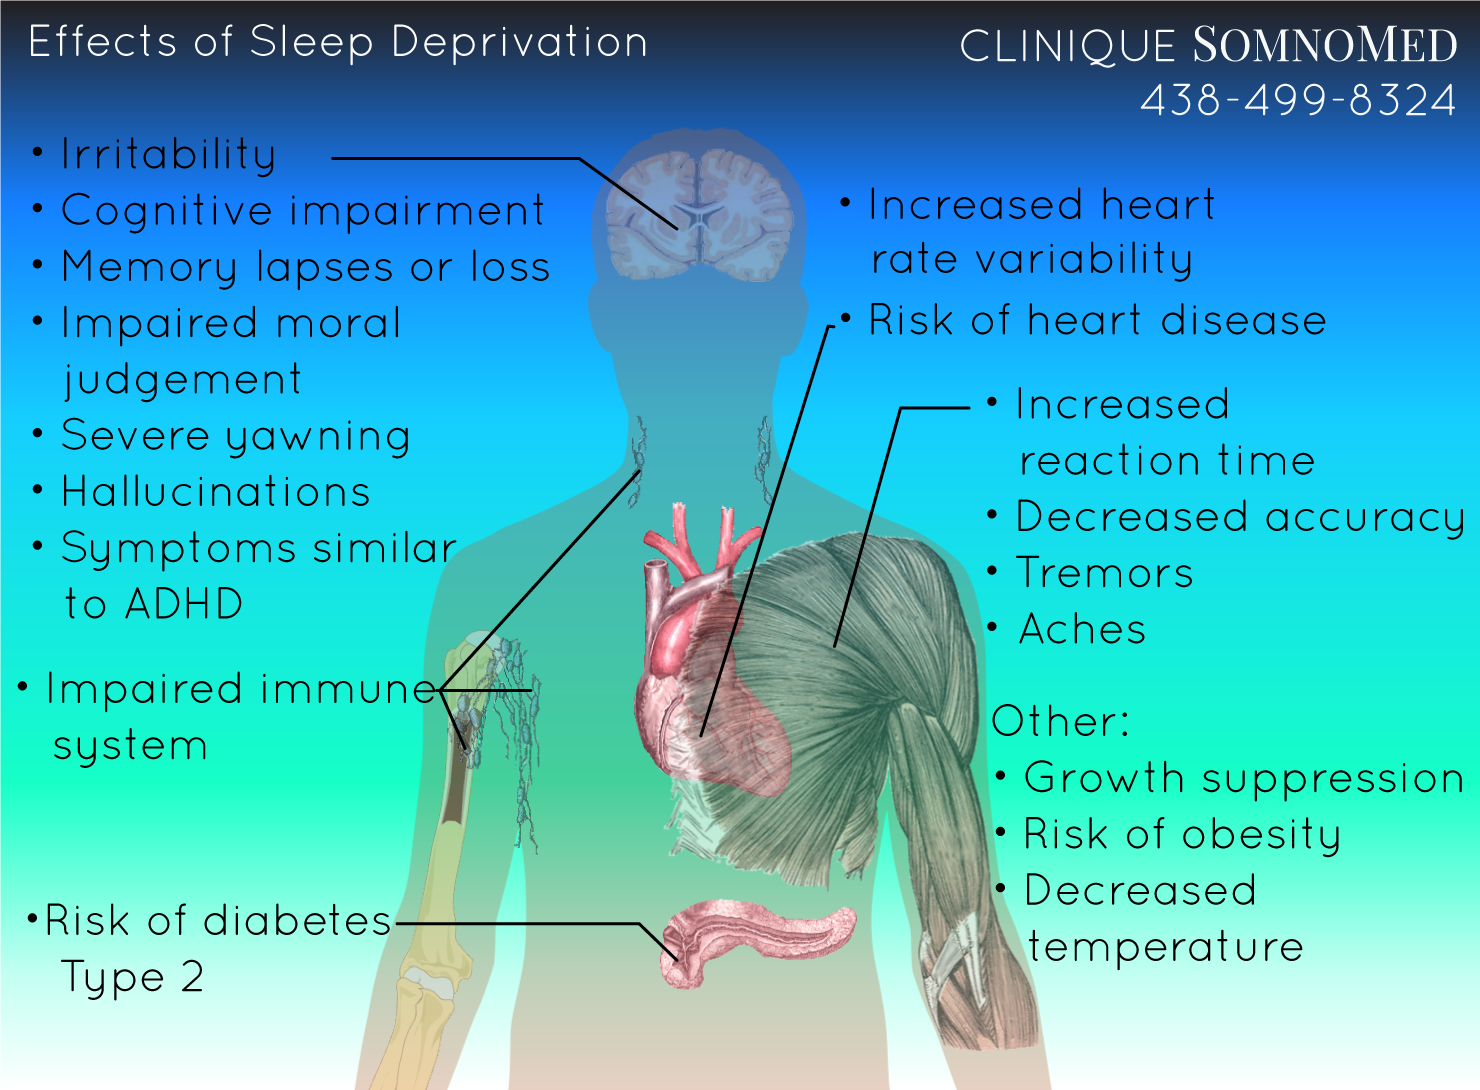 Effects of sleep depirvation